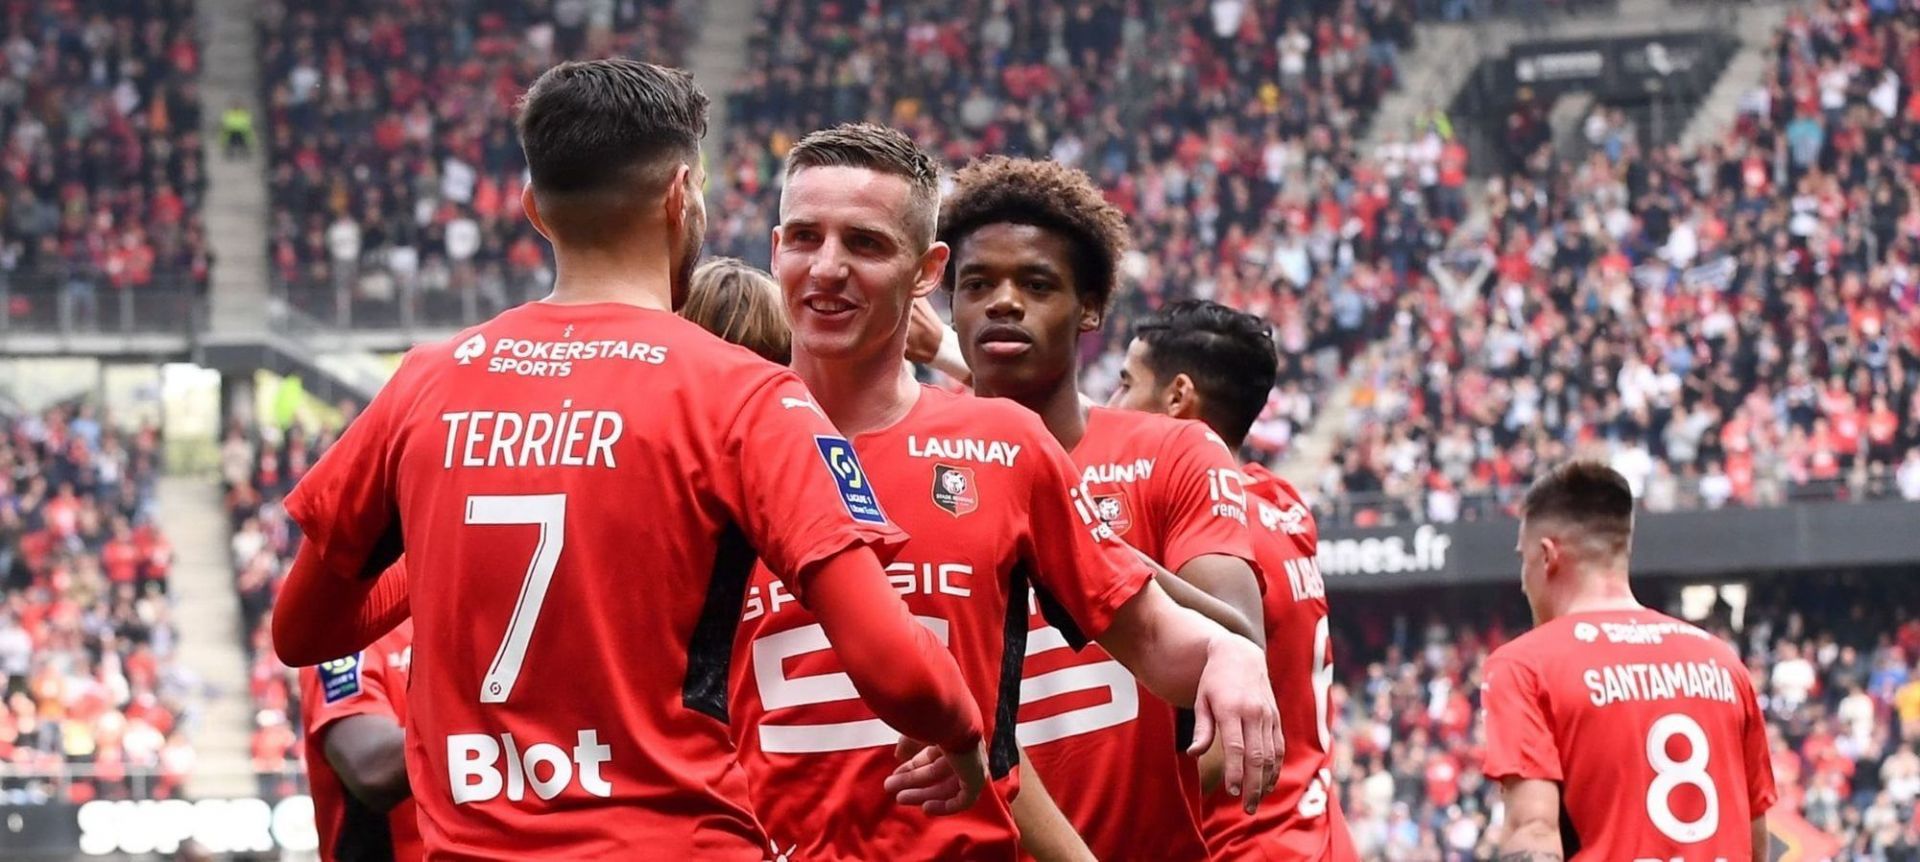 Rennes will be hopeful of a positive result when they face Saint-Etienne this weekend.